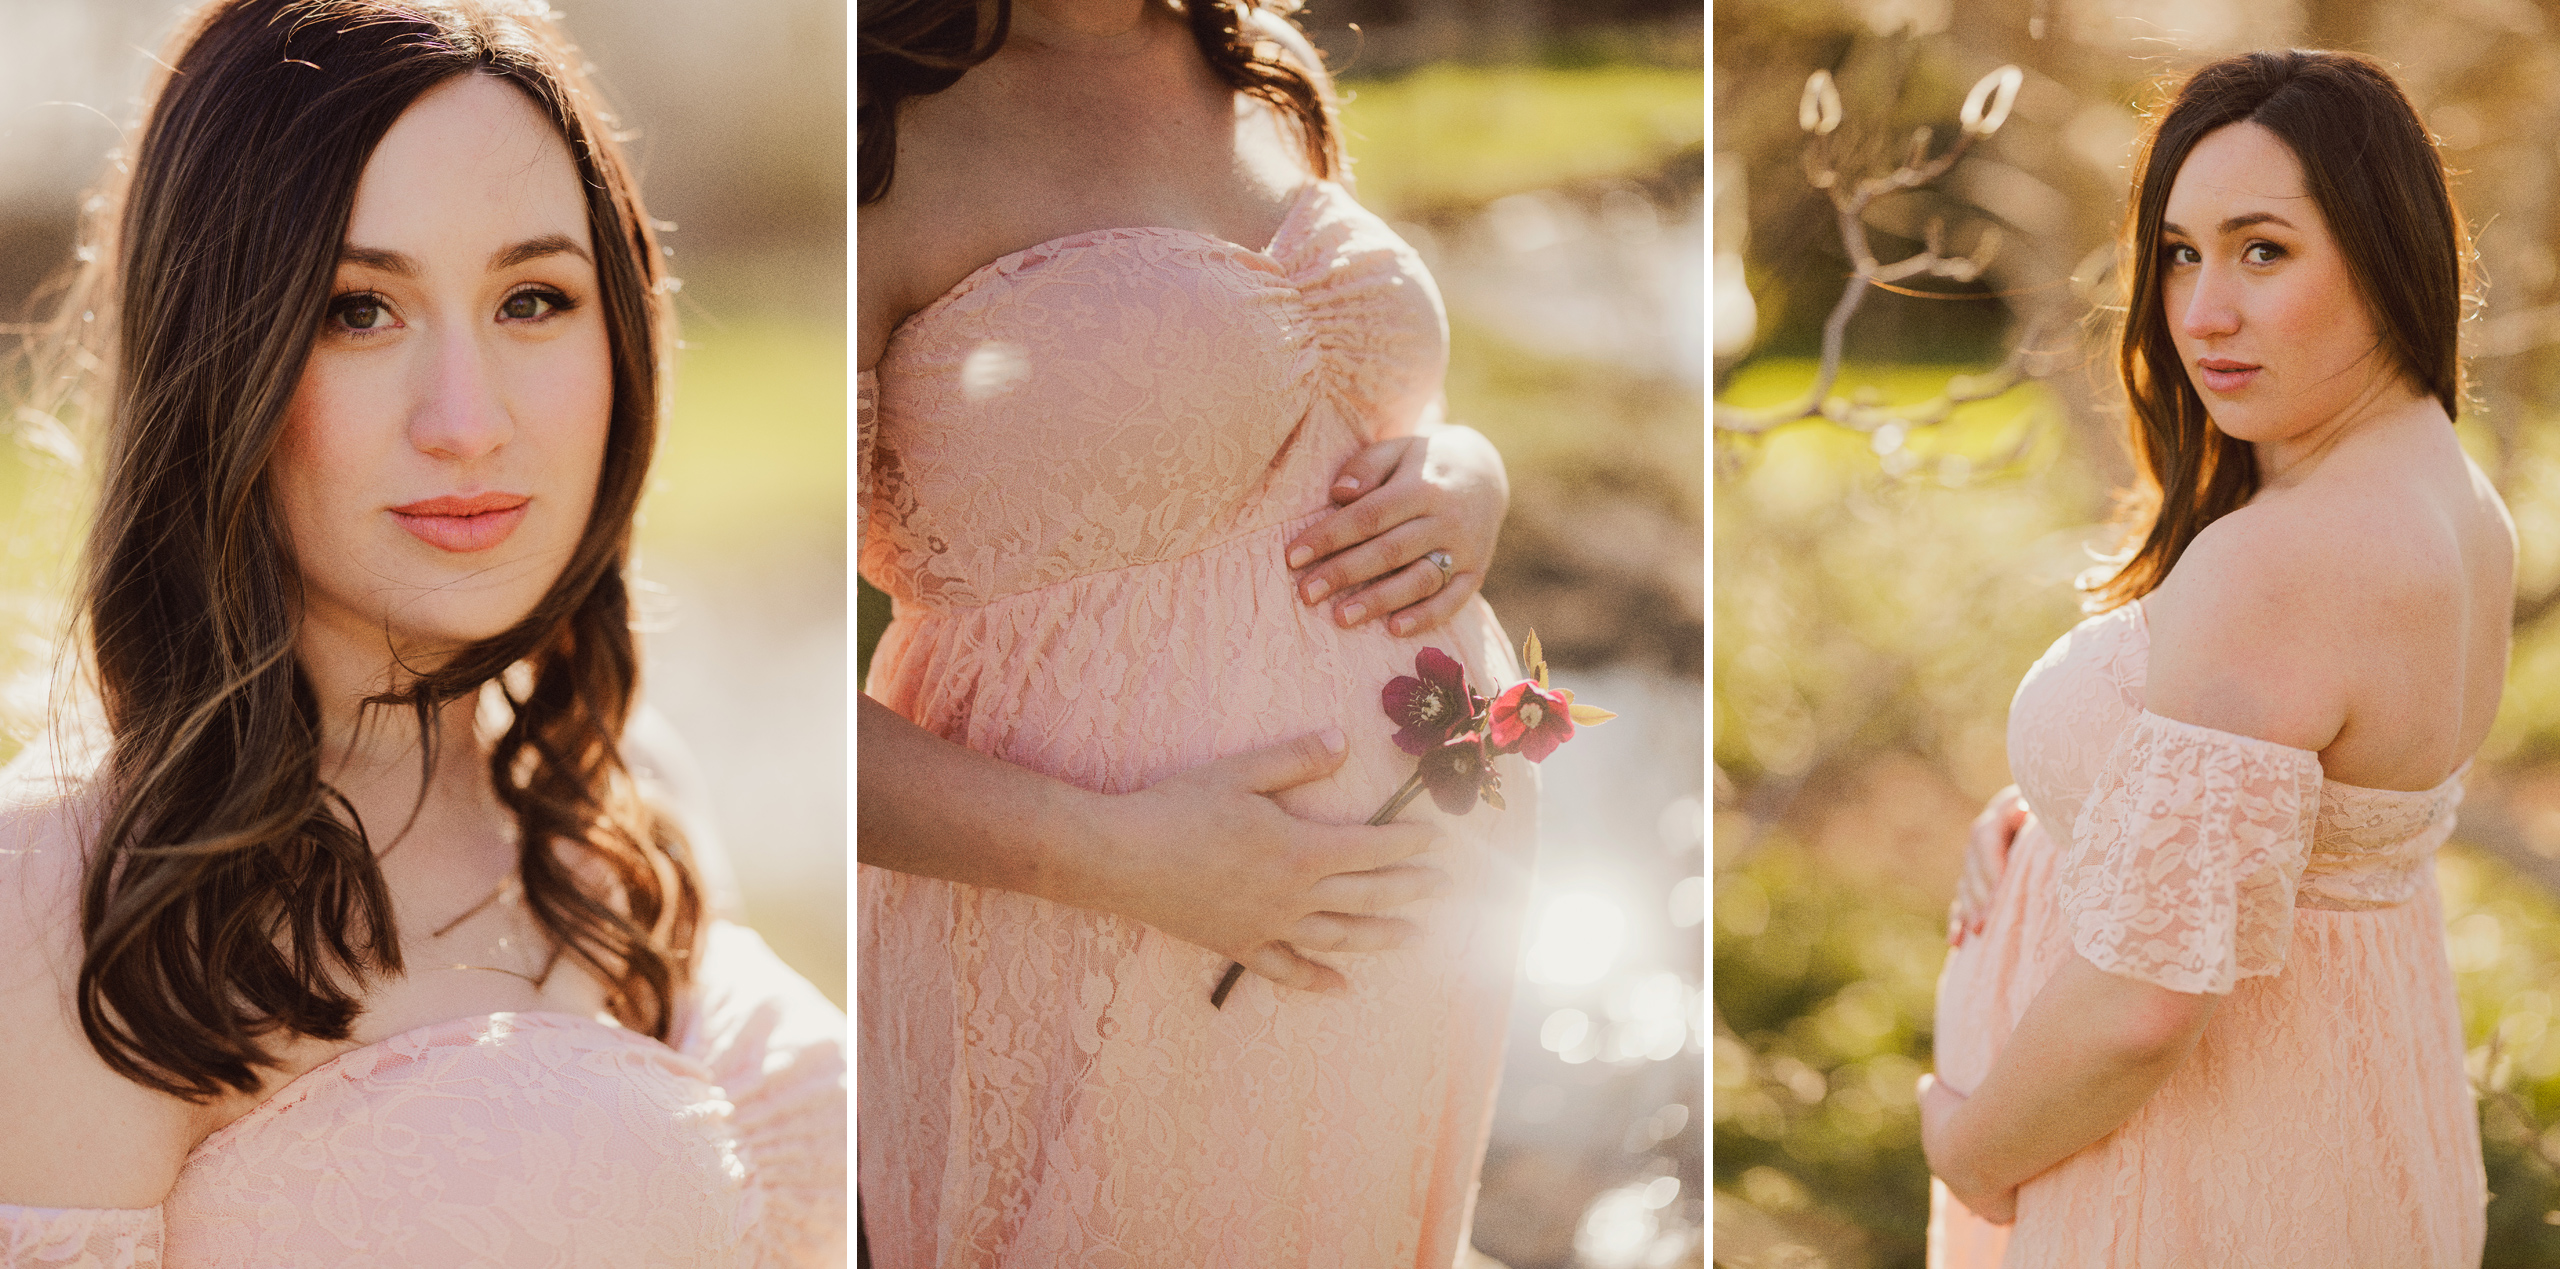 Niagara maternity photography Spring Afterglow Images